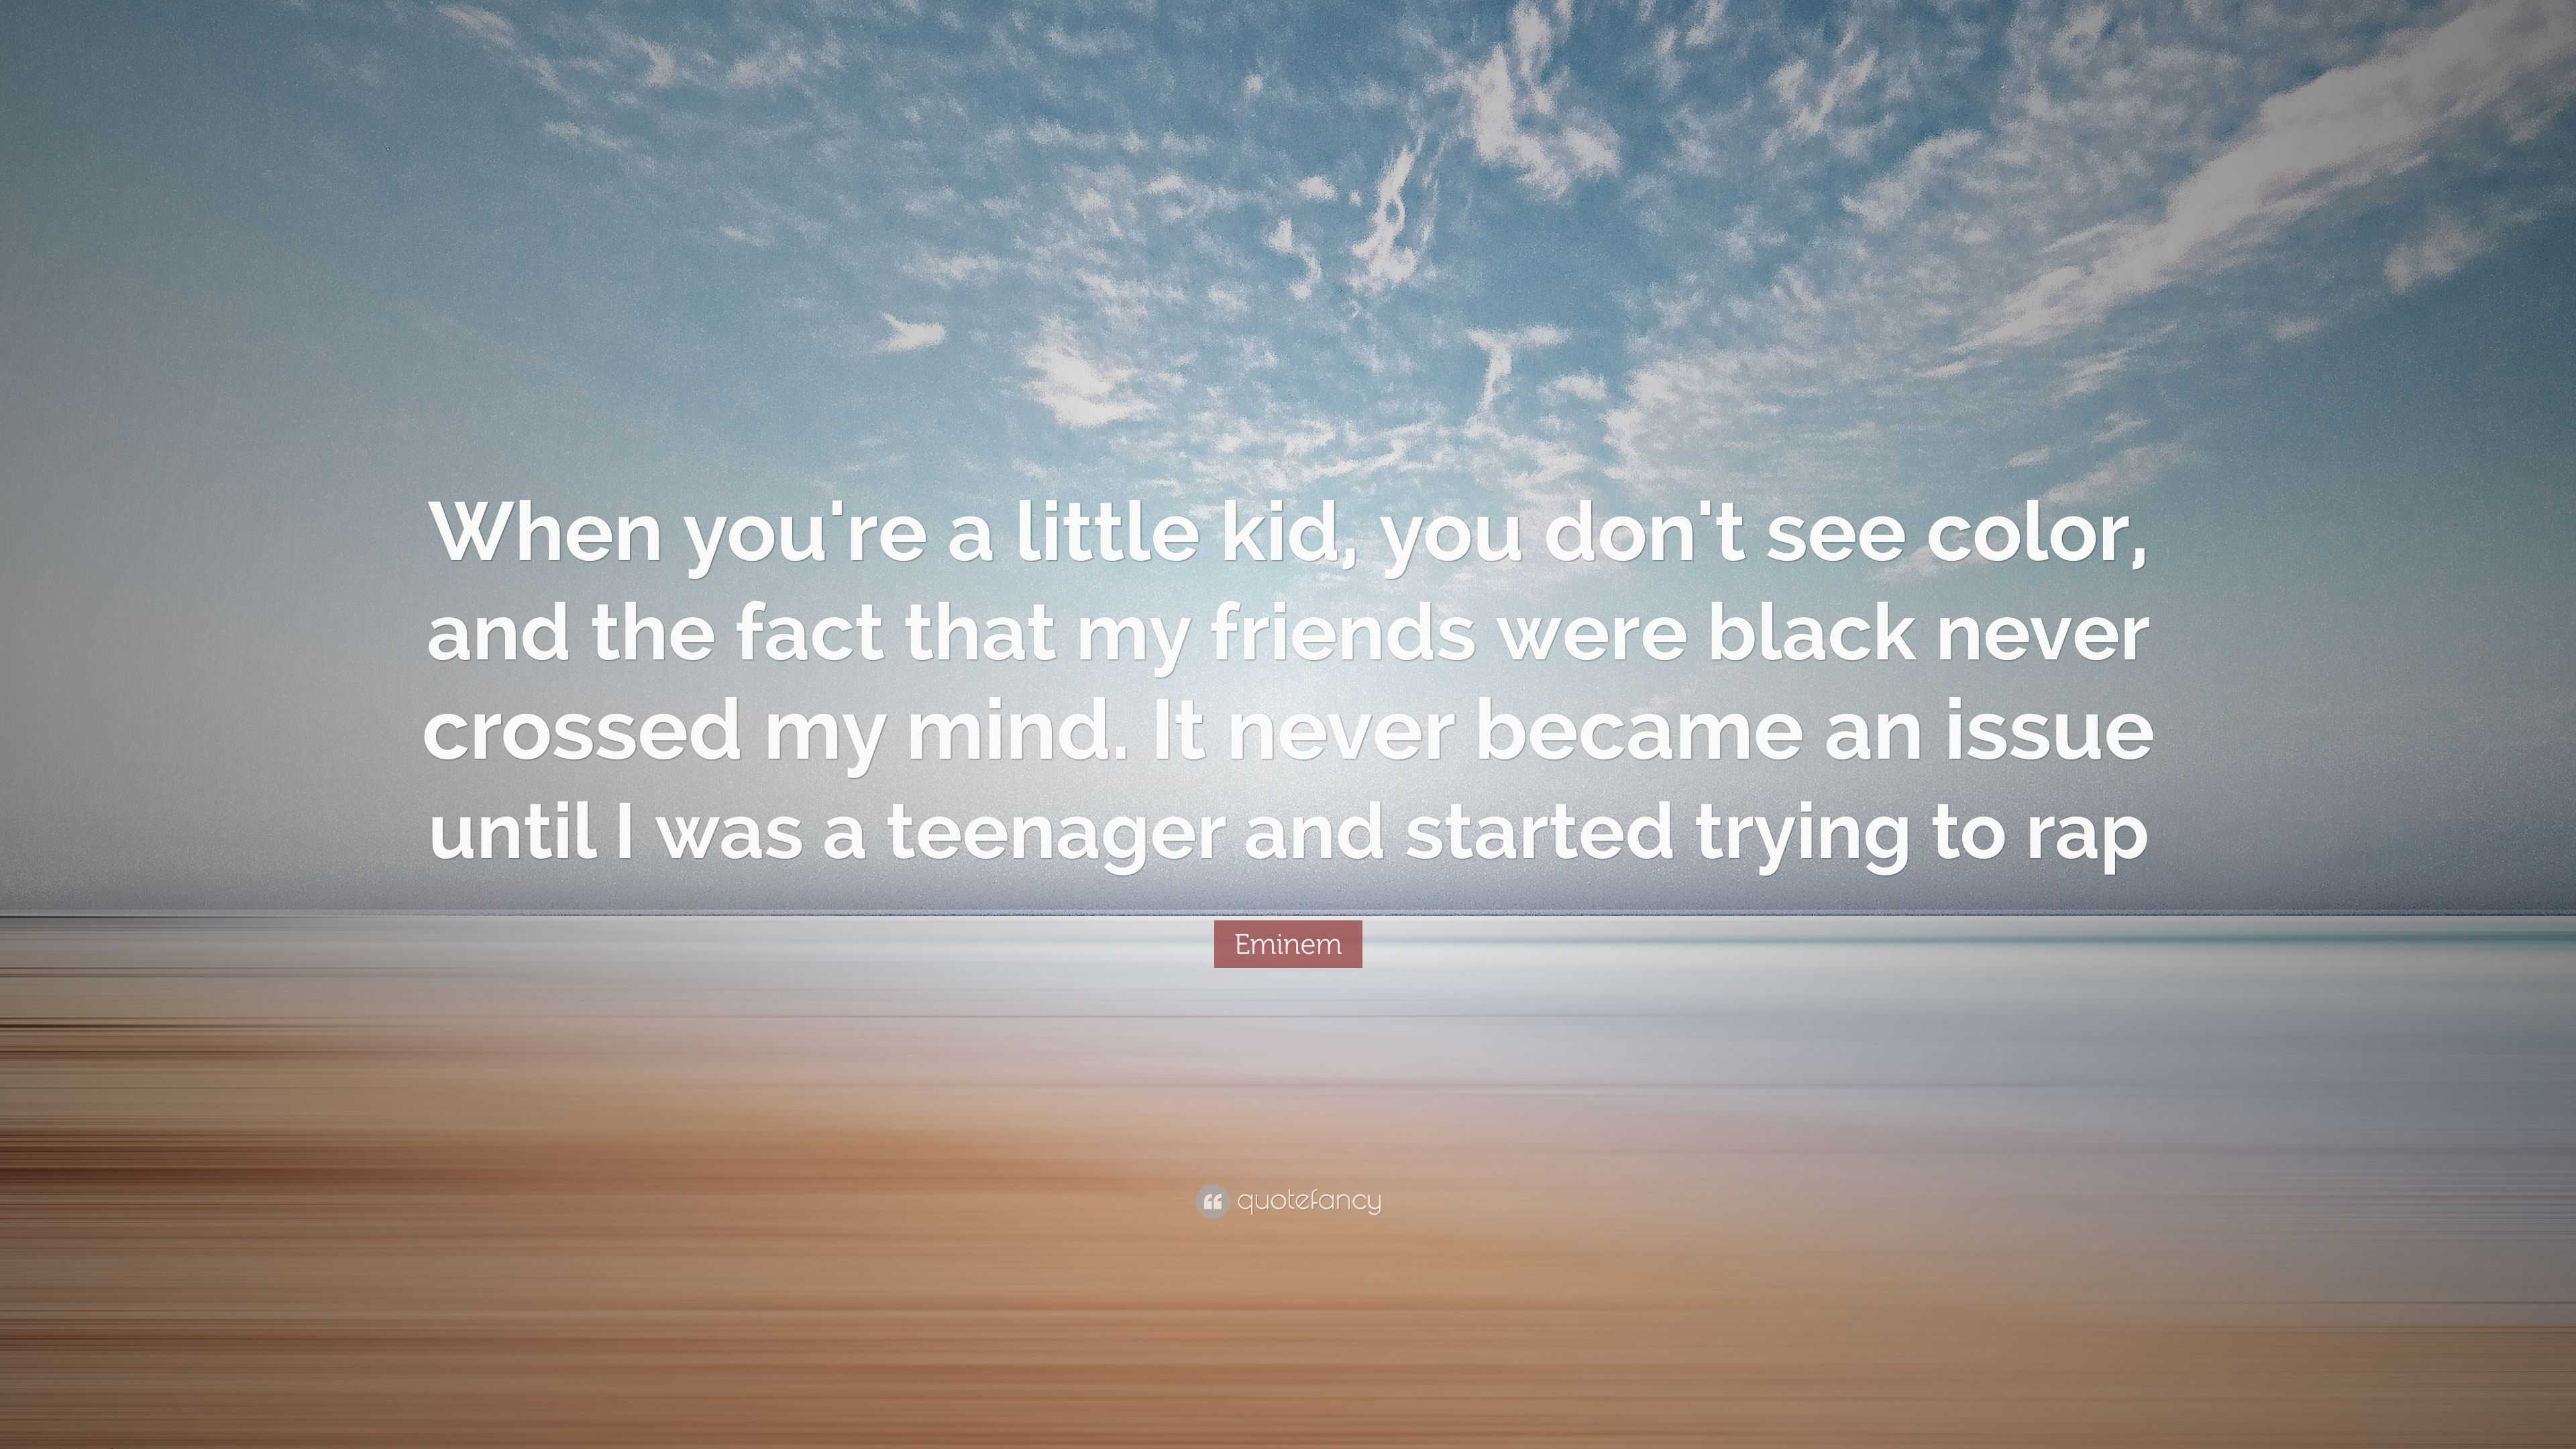 Eminem Quote: “When you're a little kid, you don't see color, and the ...